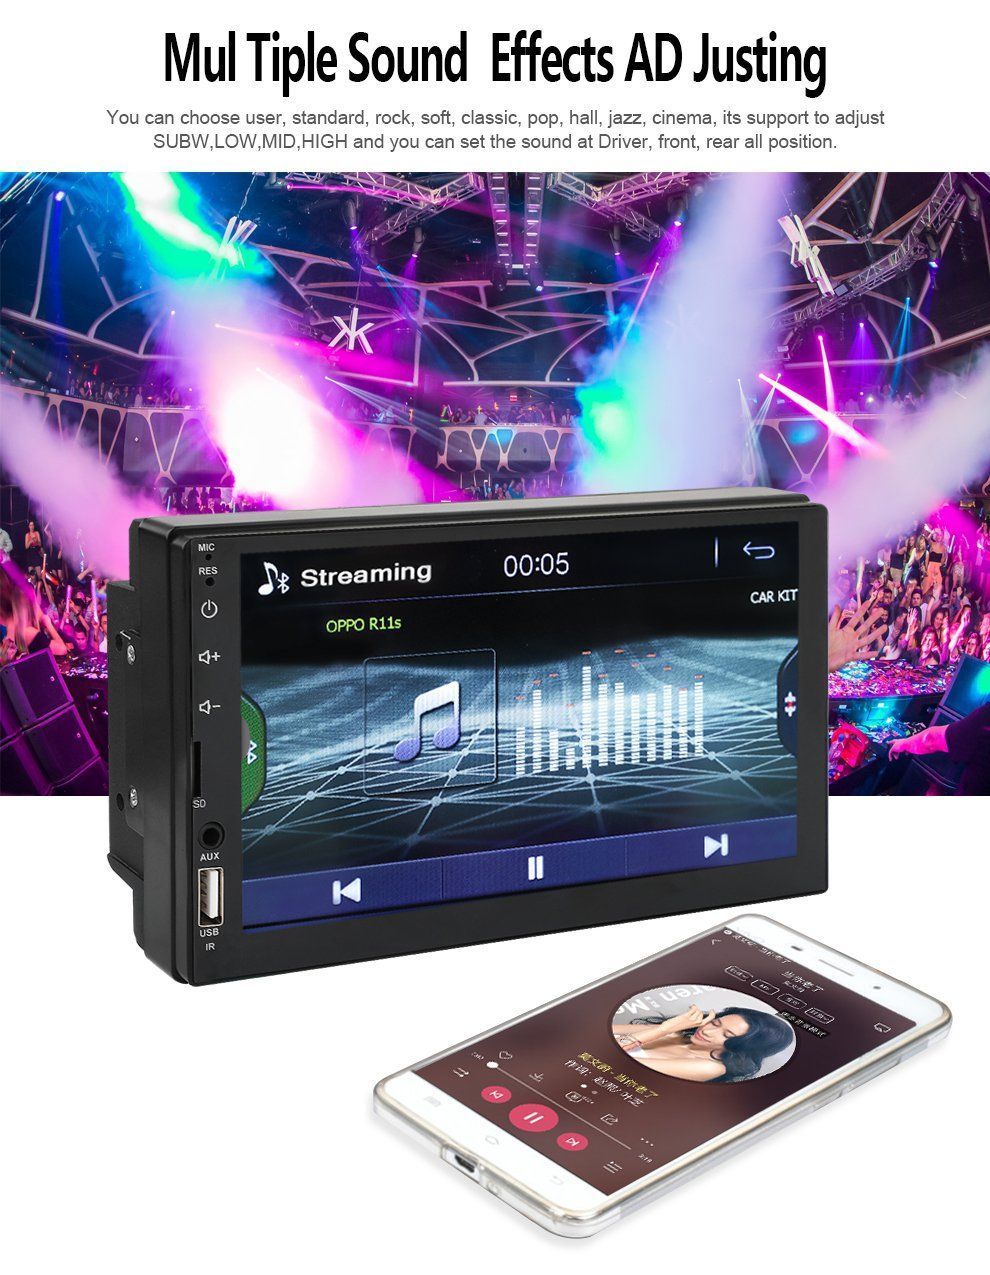 7049D-7-Inch-2-DIN-WINCE-Car-MP5-Player-FM-Radio-Stereo-HD-Touch-Screen-USB-AUX-bluetooth-In-Dash-Su-1385096